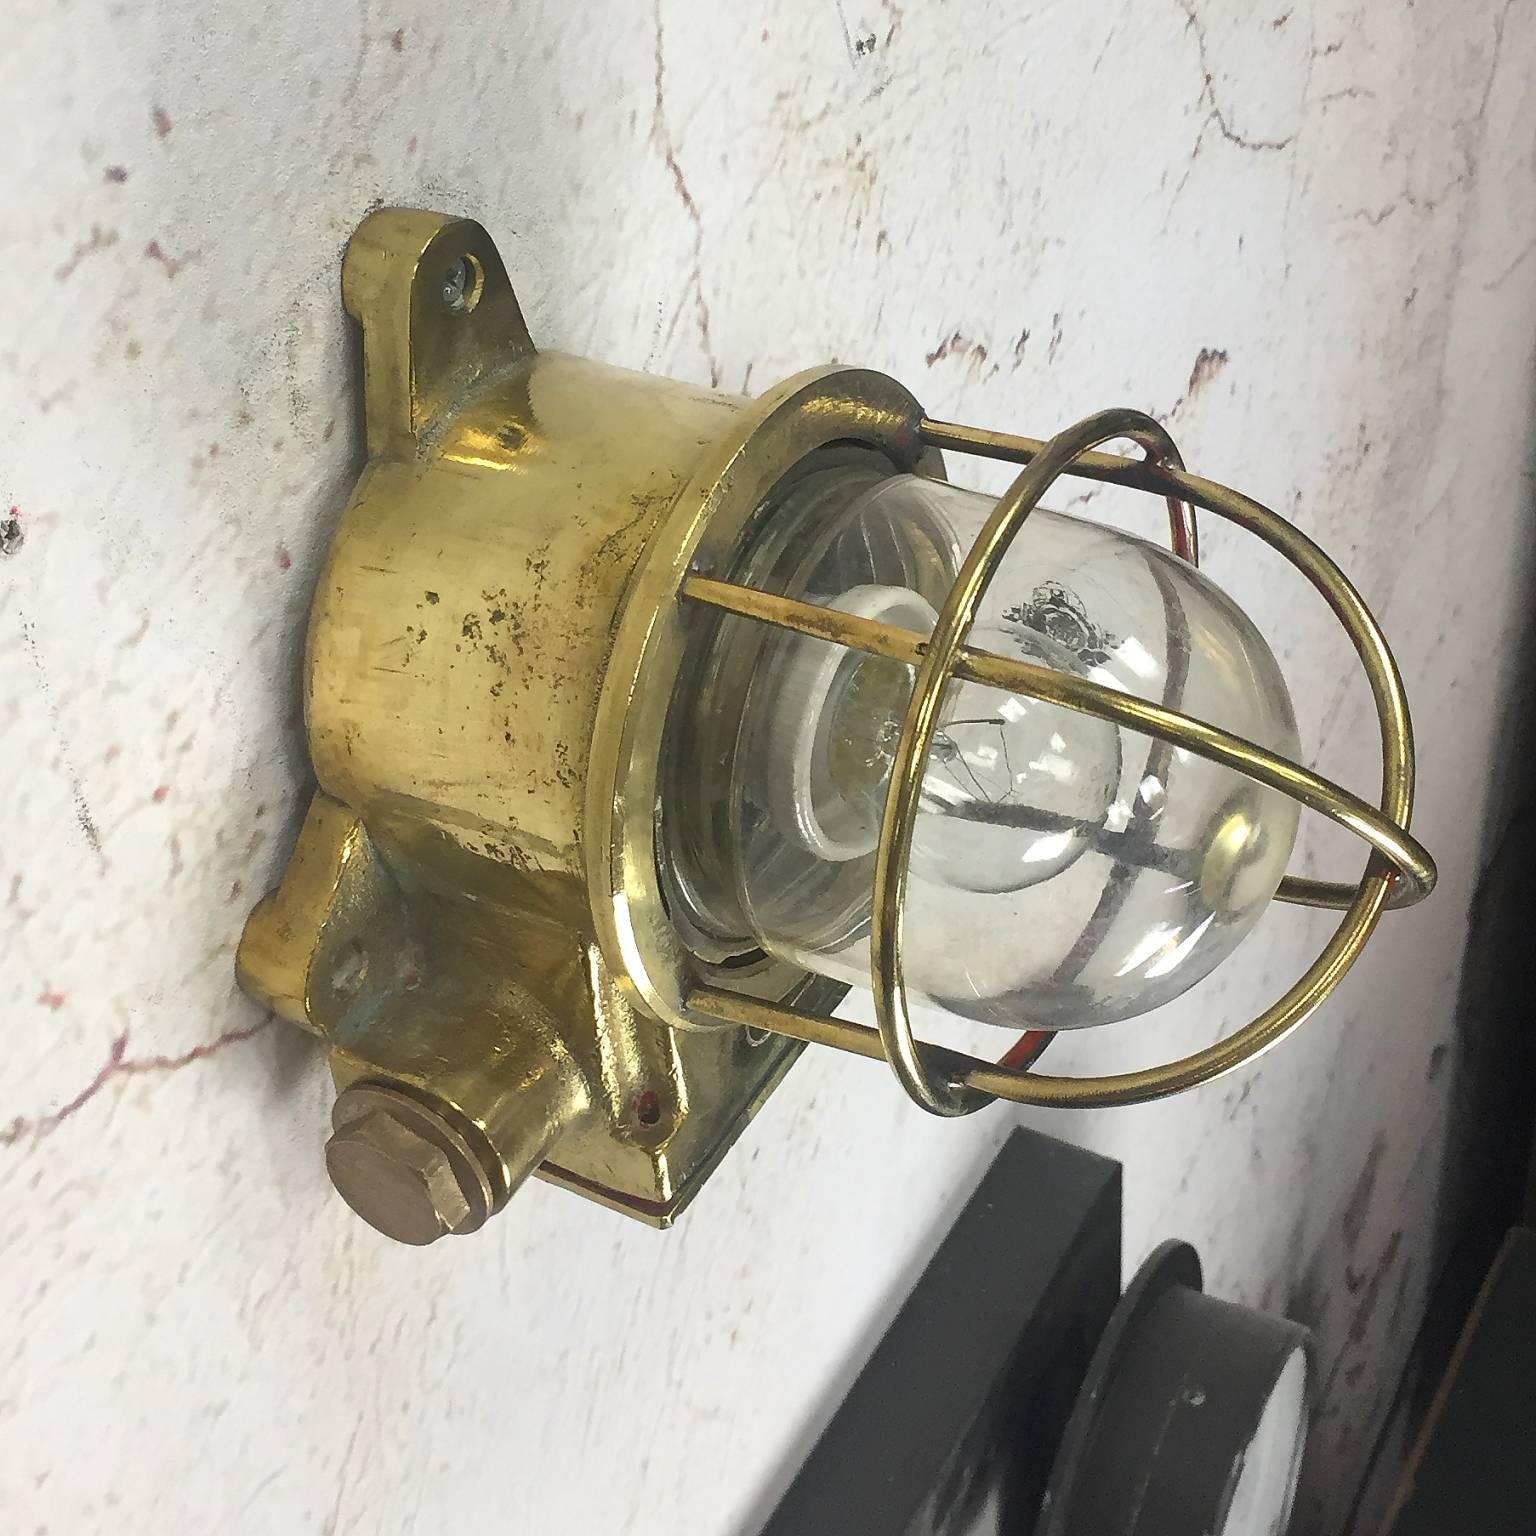 Cast Late 20th Century British Made Brass Wall Light, Cage and Glass Dome - Marine